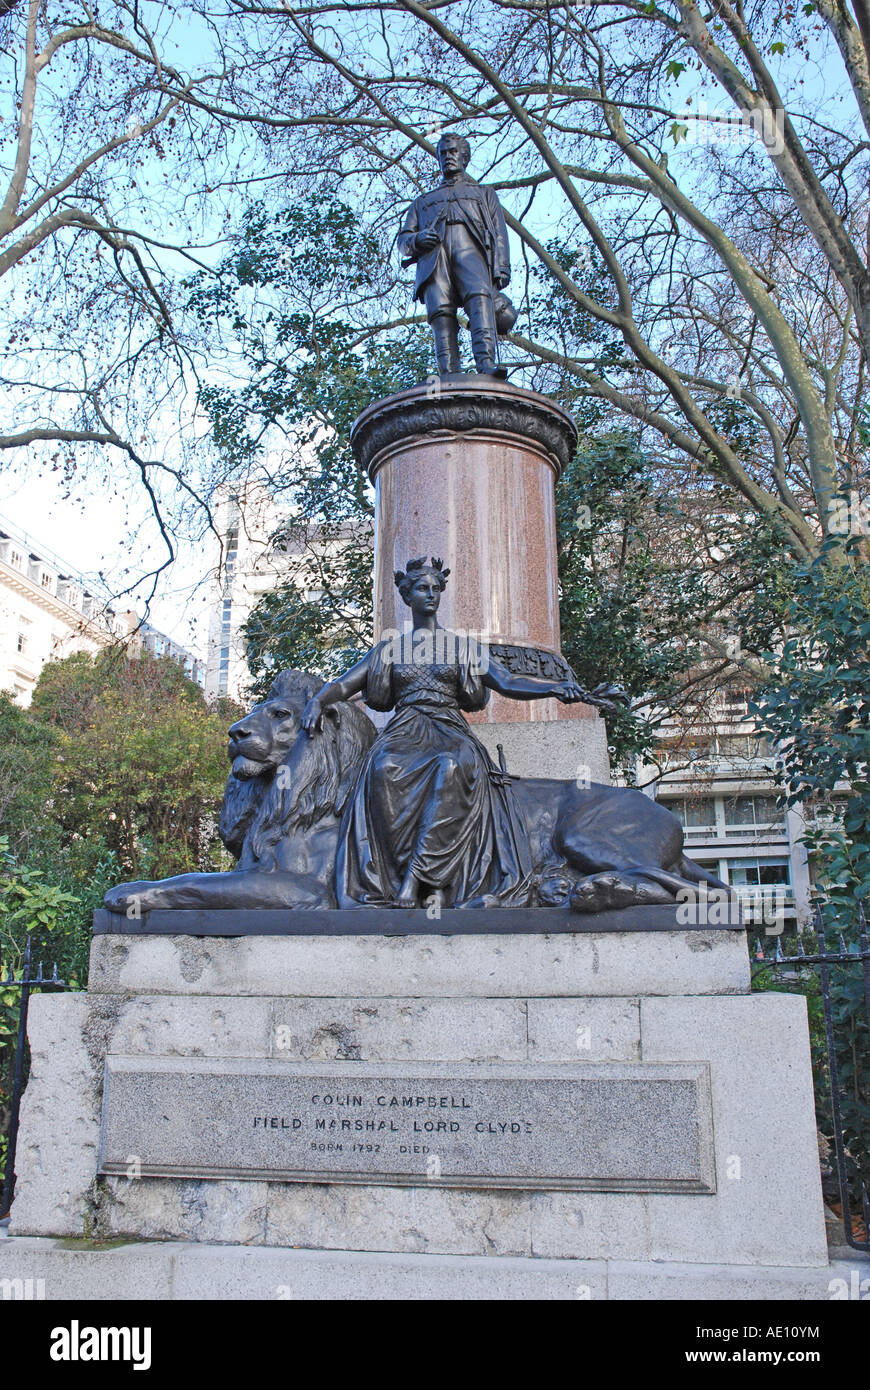 Memorial to Lord Clyde Waterloo Place London England Stock Photo